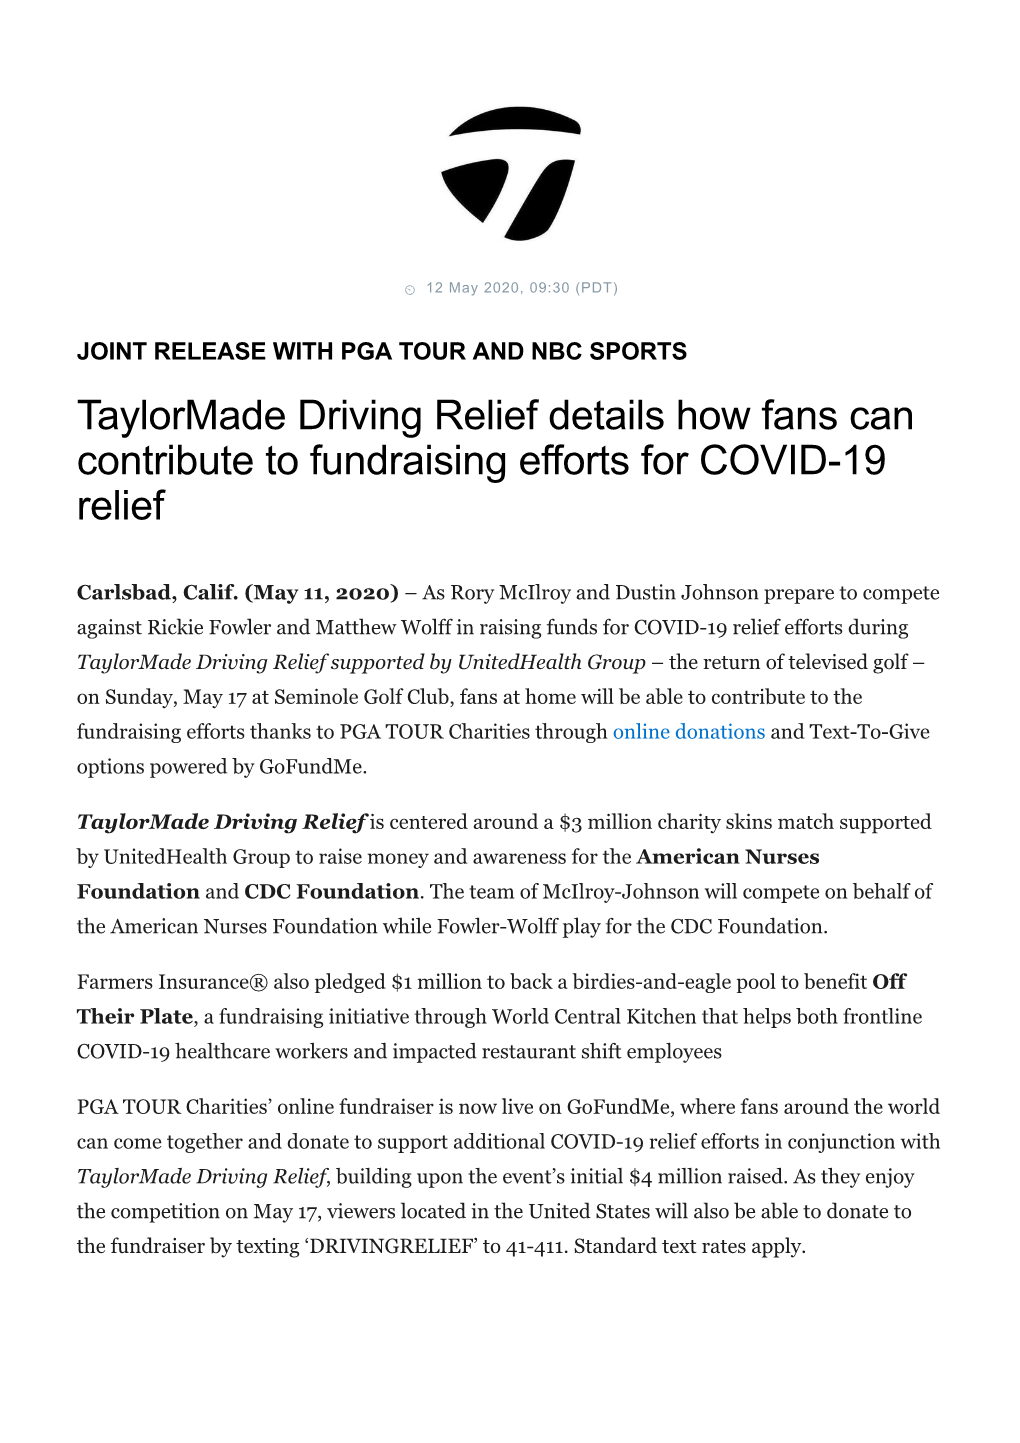 Taylormade Driving Relief Details How Fans Can Contribute to Fundraising Efforts for COVID-19 Relief